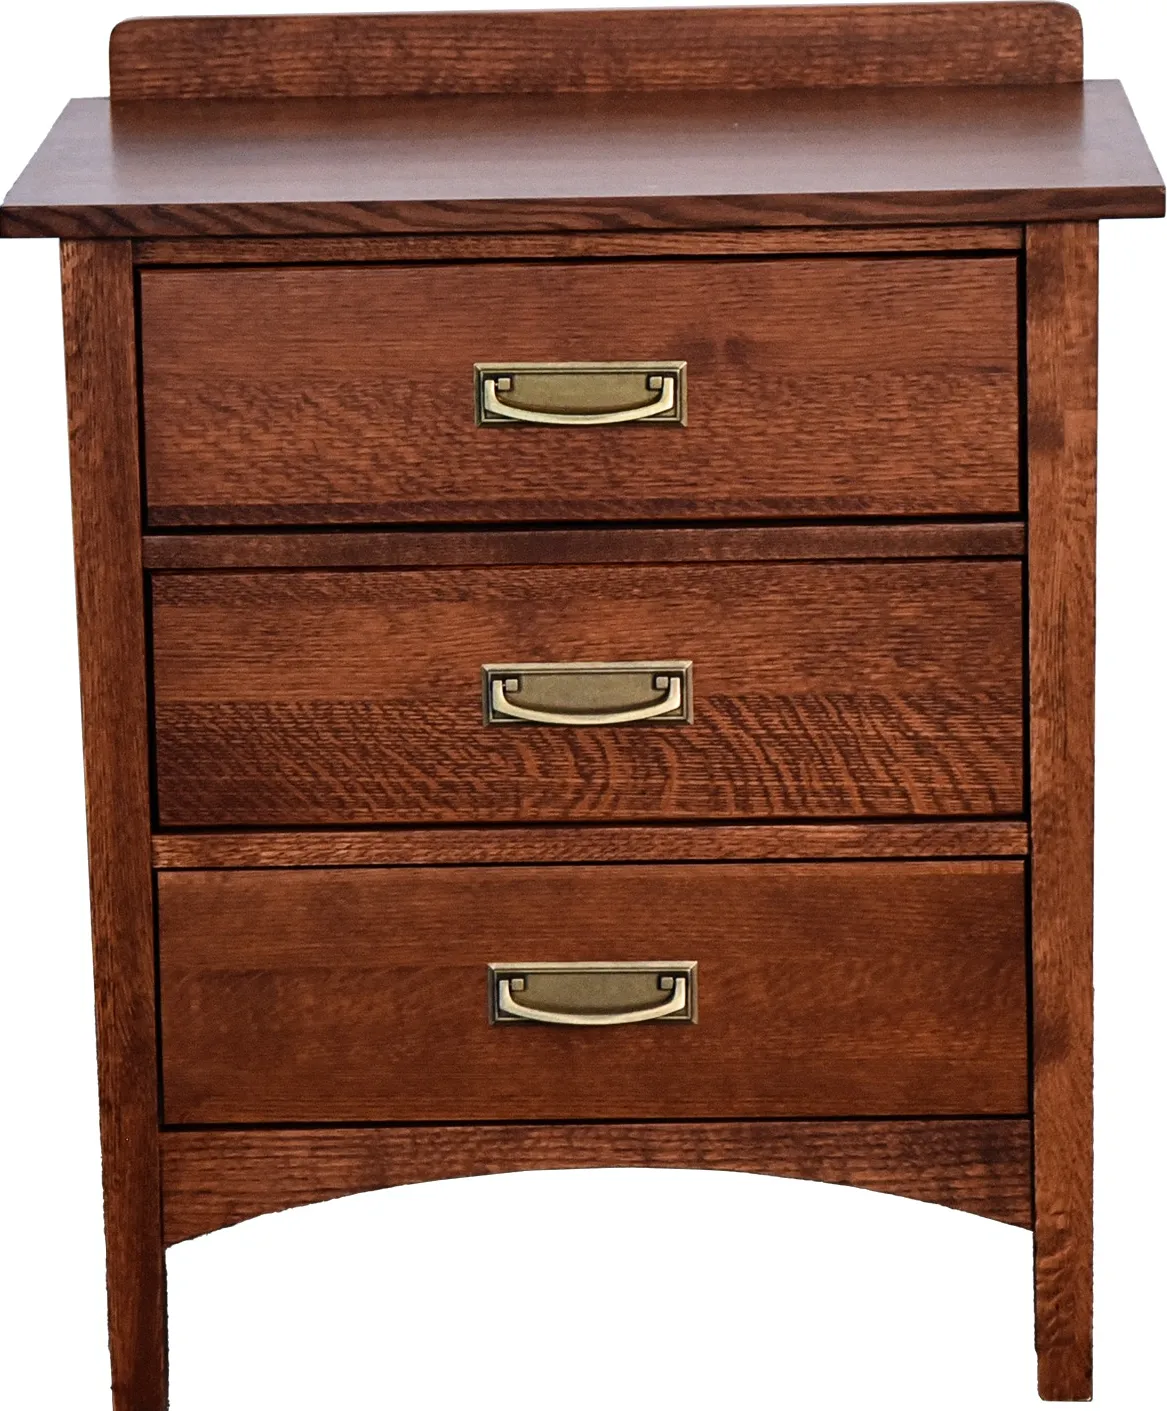 Witmer MISSION LARGE NIGHTSTAND